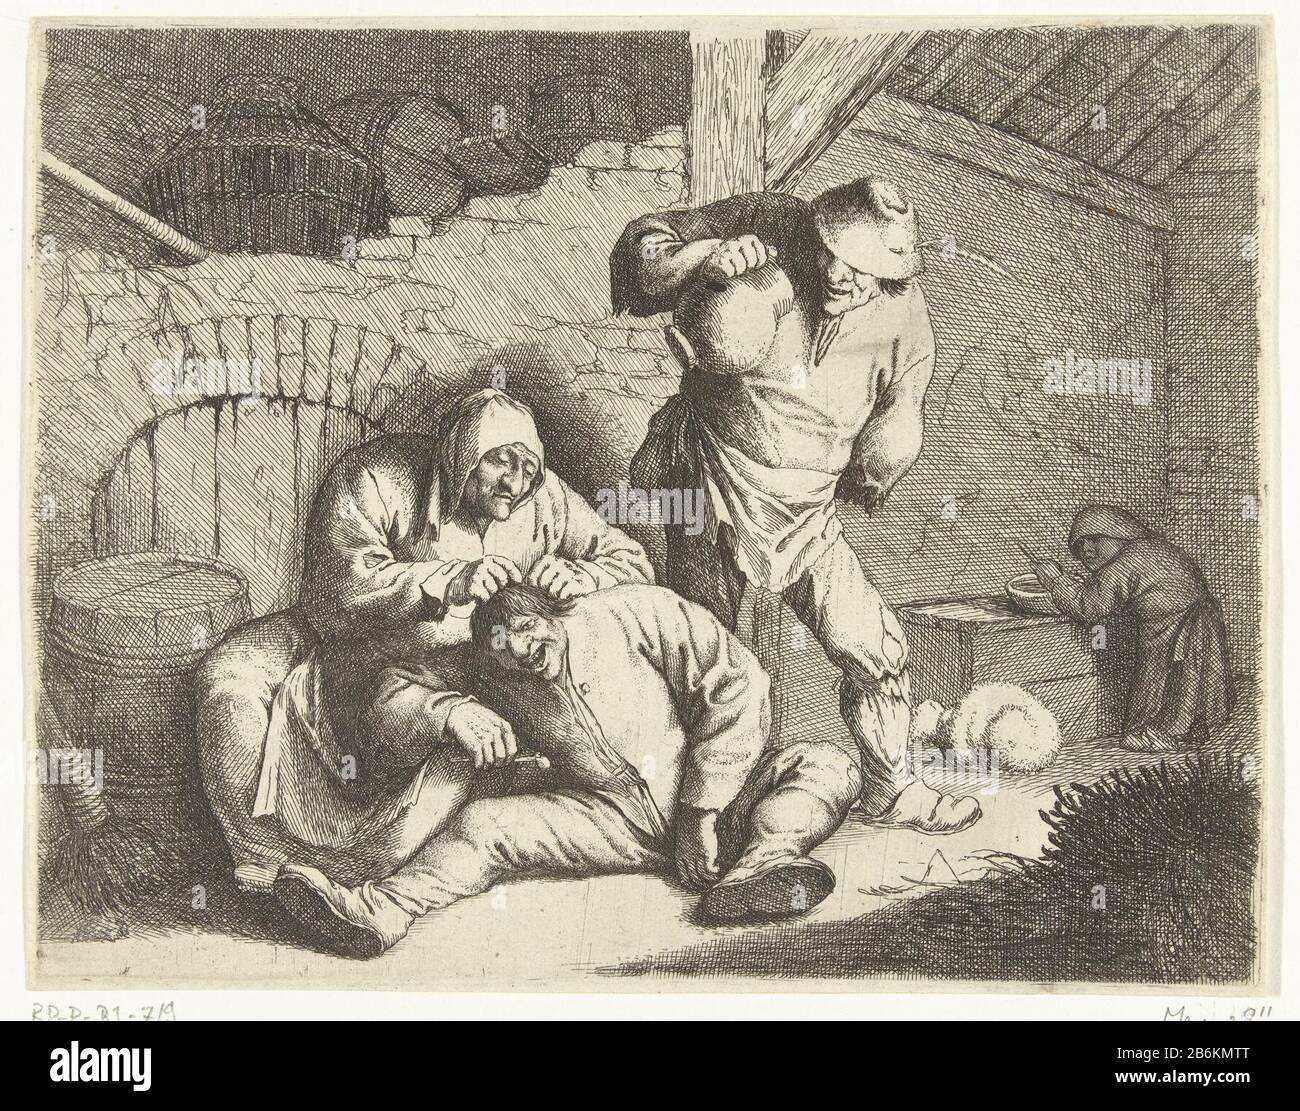 An old woman listens a man RP-P-BI-719 In a stable an old woman busy pick up a young man lice from the hair too. Next to them is a dilapidated looking man in a jar too. In the background a third man in a bowl eet. Manufacturer : printmaker Willem Bass to drawing: Anthonie Victorijnsprentmaker: Adriaen van Ostade (rejected attribution) Place manufacture: Amsterdam Date: 1633 - 1672 Physical features: etching material: paper Technique: etching Dimensions: plate edge: h 152 mm × W 193 mm Subject: remo insects from body Stock Photo